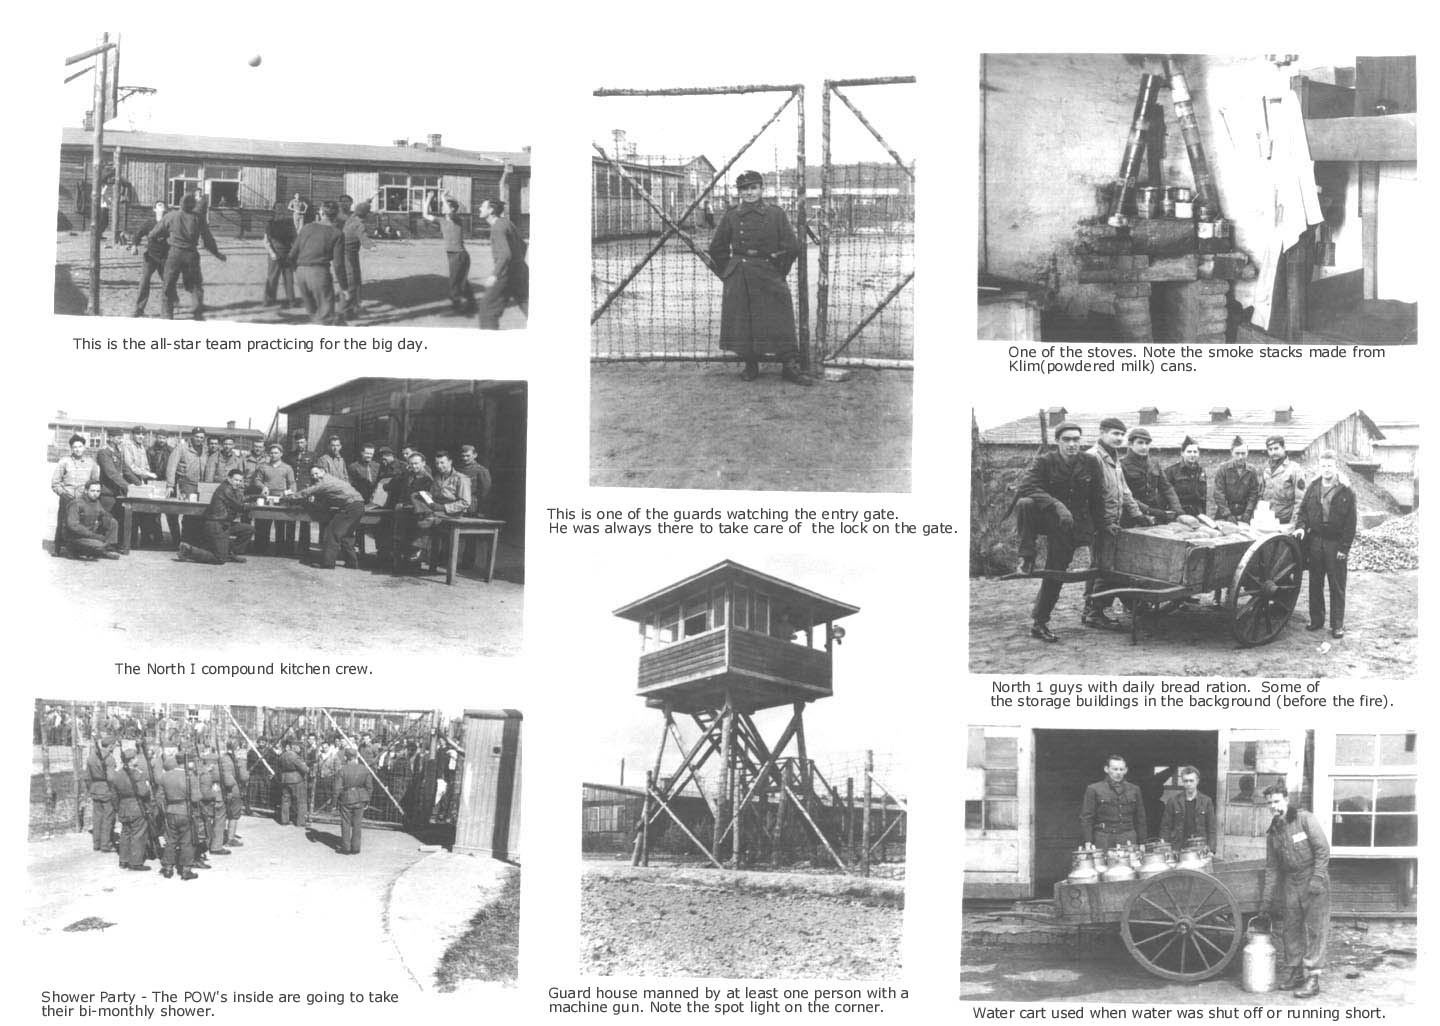 WWII German POW camp photos - Plate 3 - Stalag Luft I